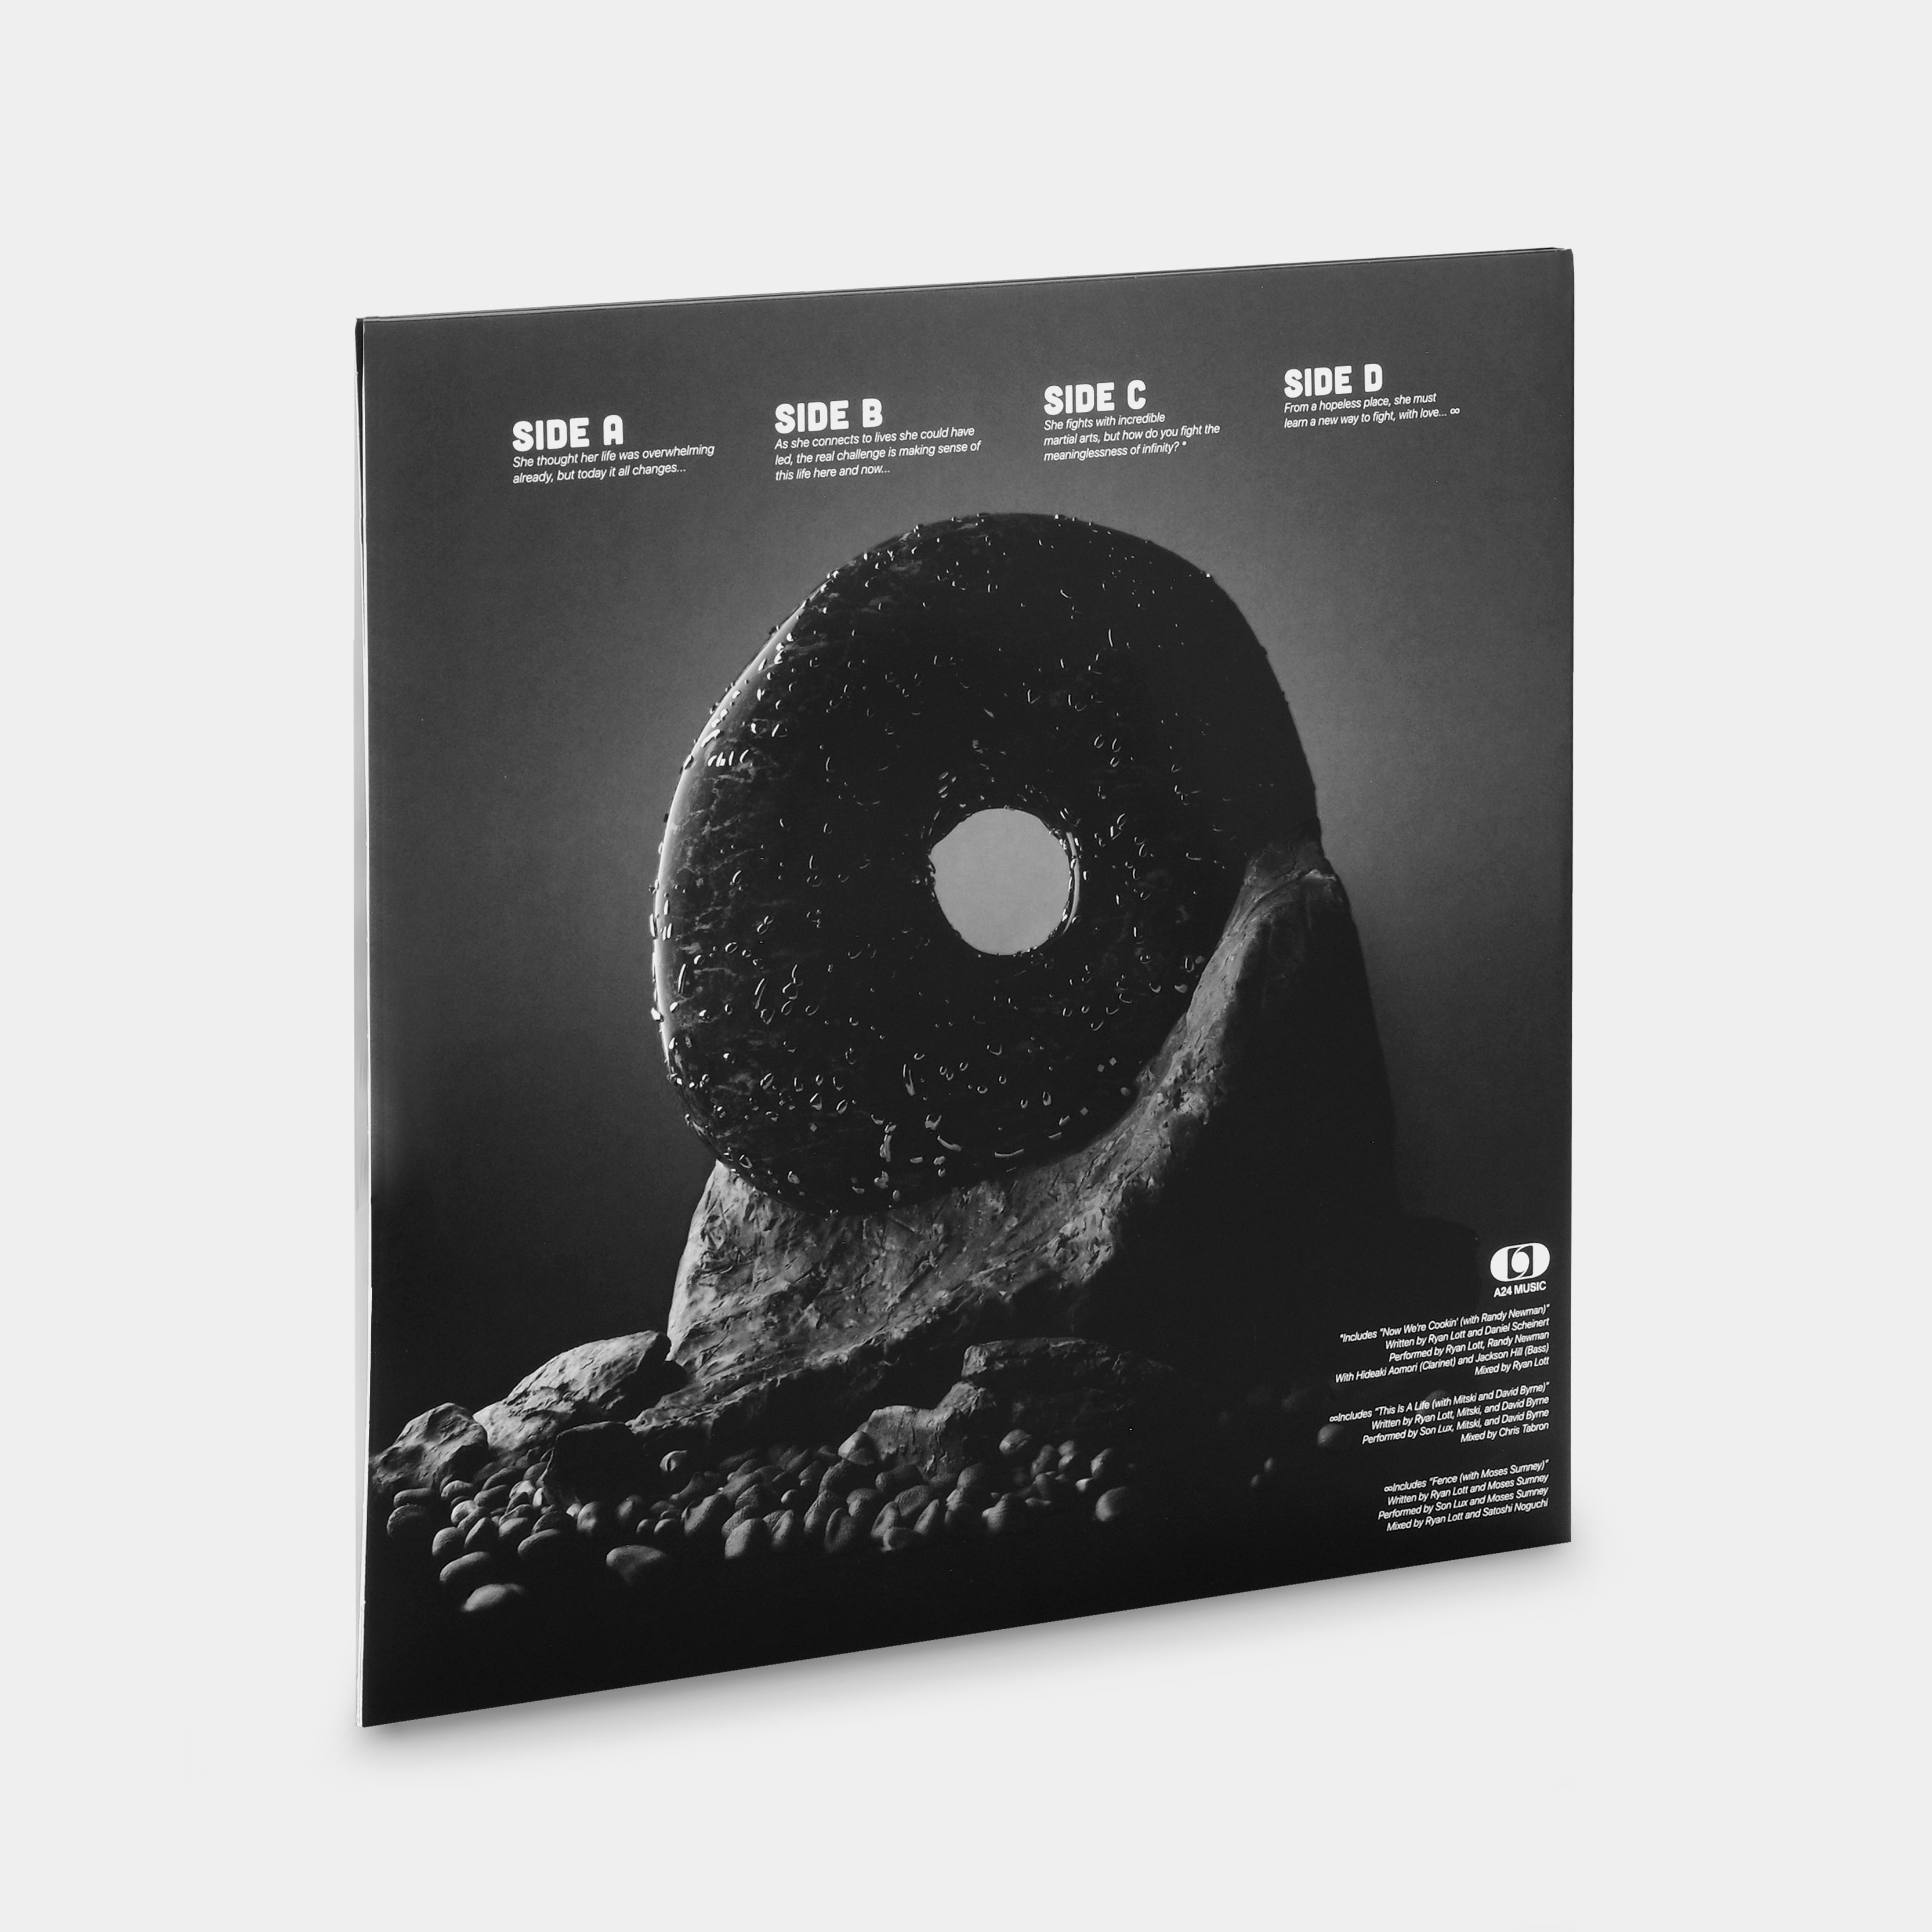 Son Lux - Everything Everywhere All at Once (Original Motion Picture Soundtrack) 2xLP Black and White Vinyl Record